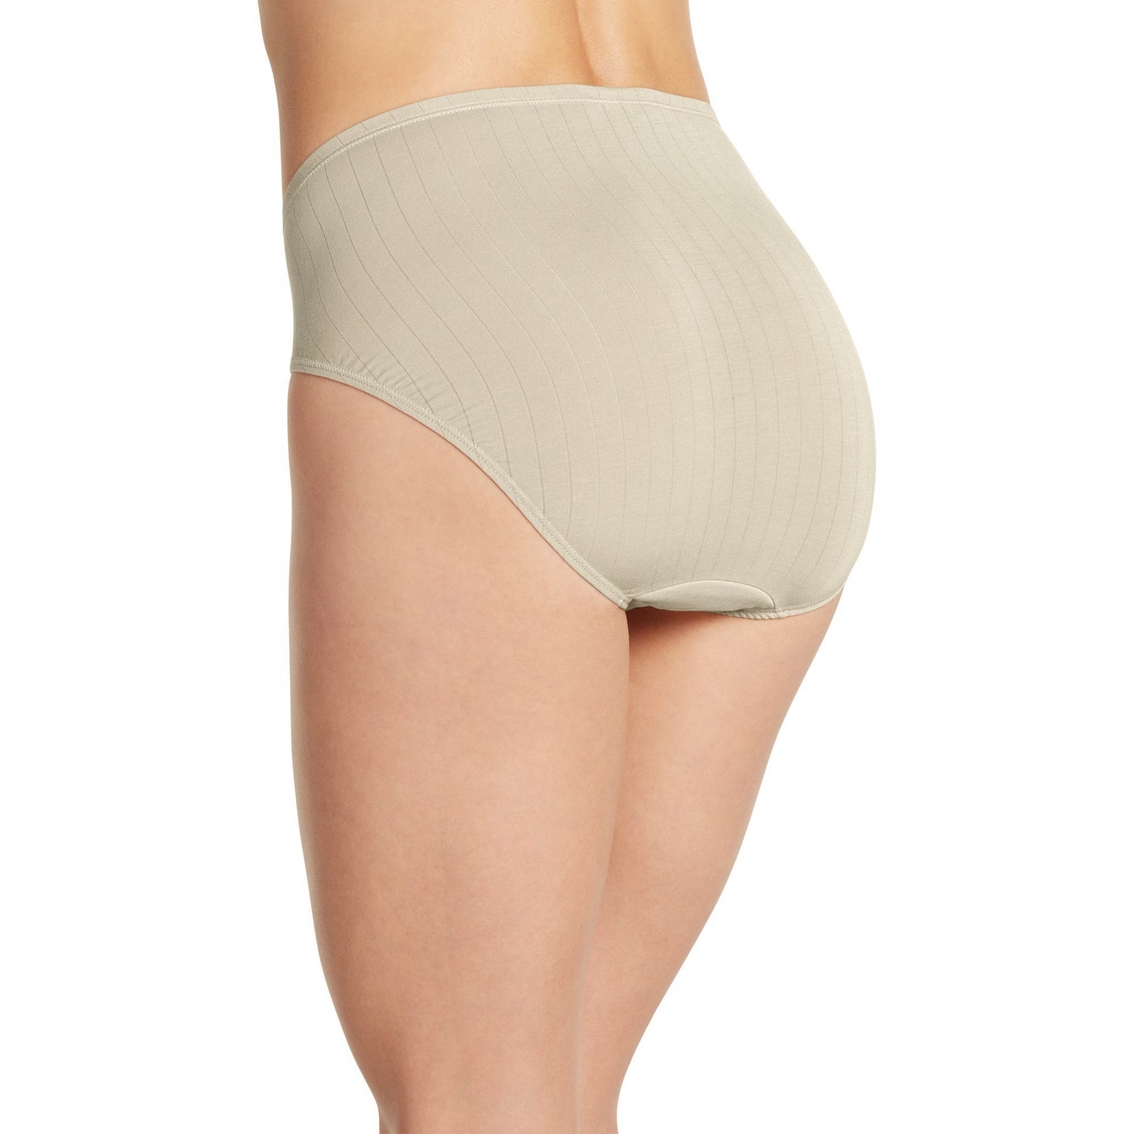 Jockey Supersoft Breathe French Cut Briefs 3 pk. - Image 3 of 3